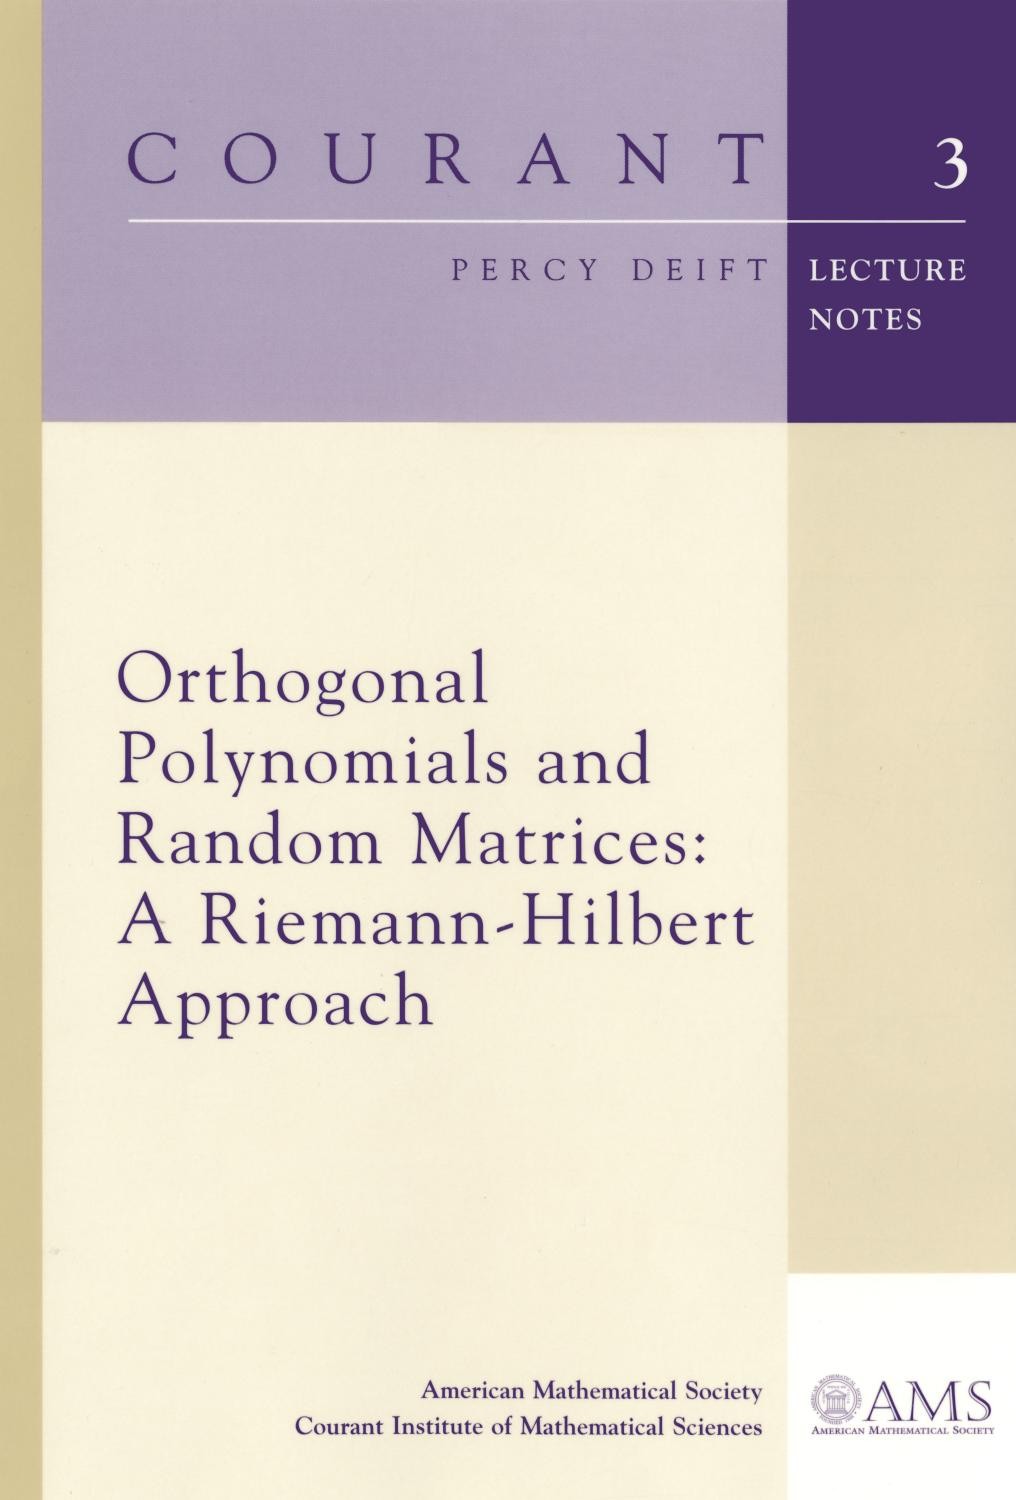 Orthogonal Polynomials and Random Matrices: A Riemann-Hilbert Approach: A Riemann-Hilbert Approach